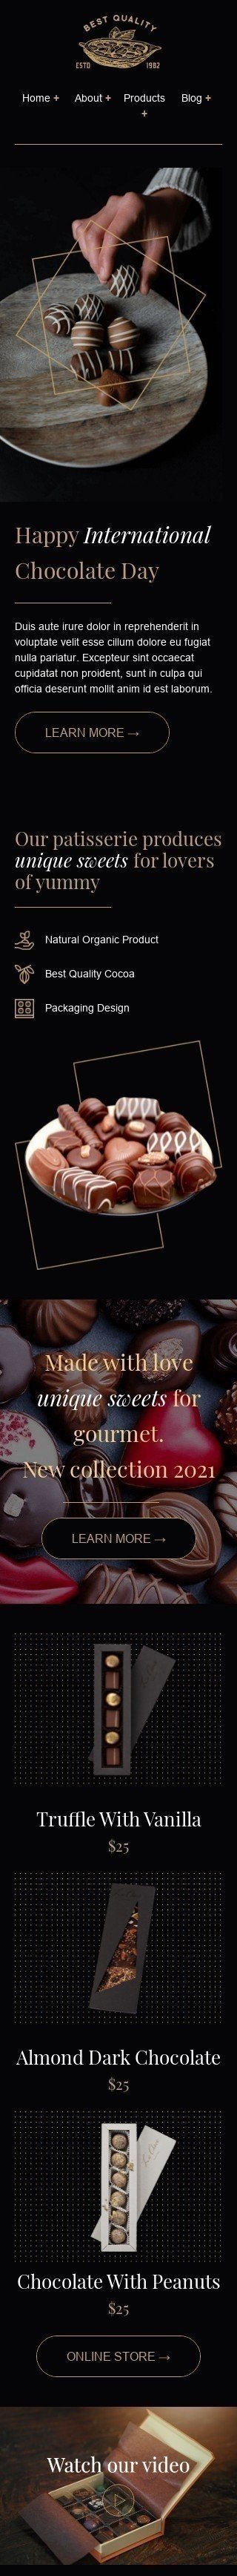 International Chocolate Day Email Template «Made with love» for Food industry mobile view